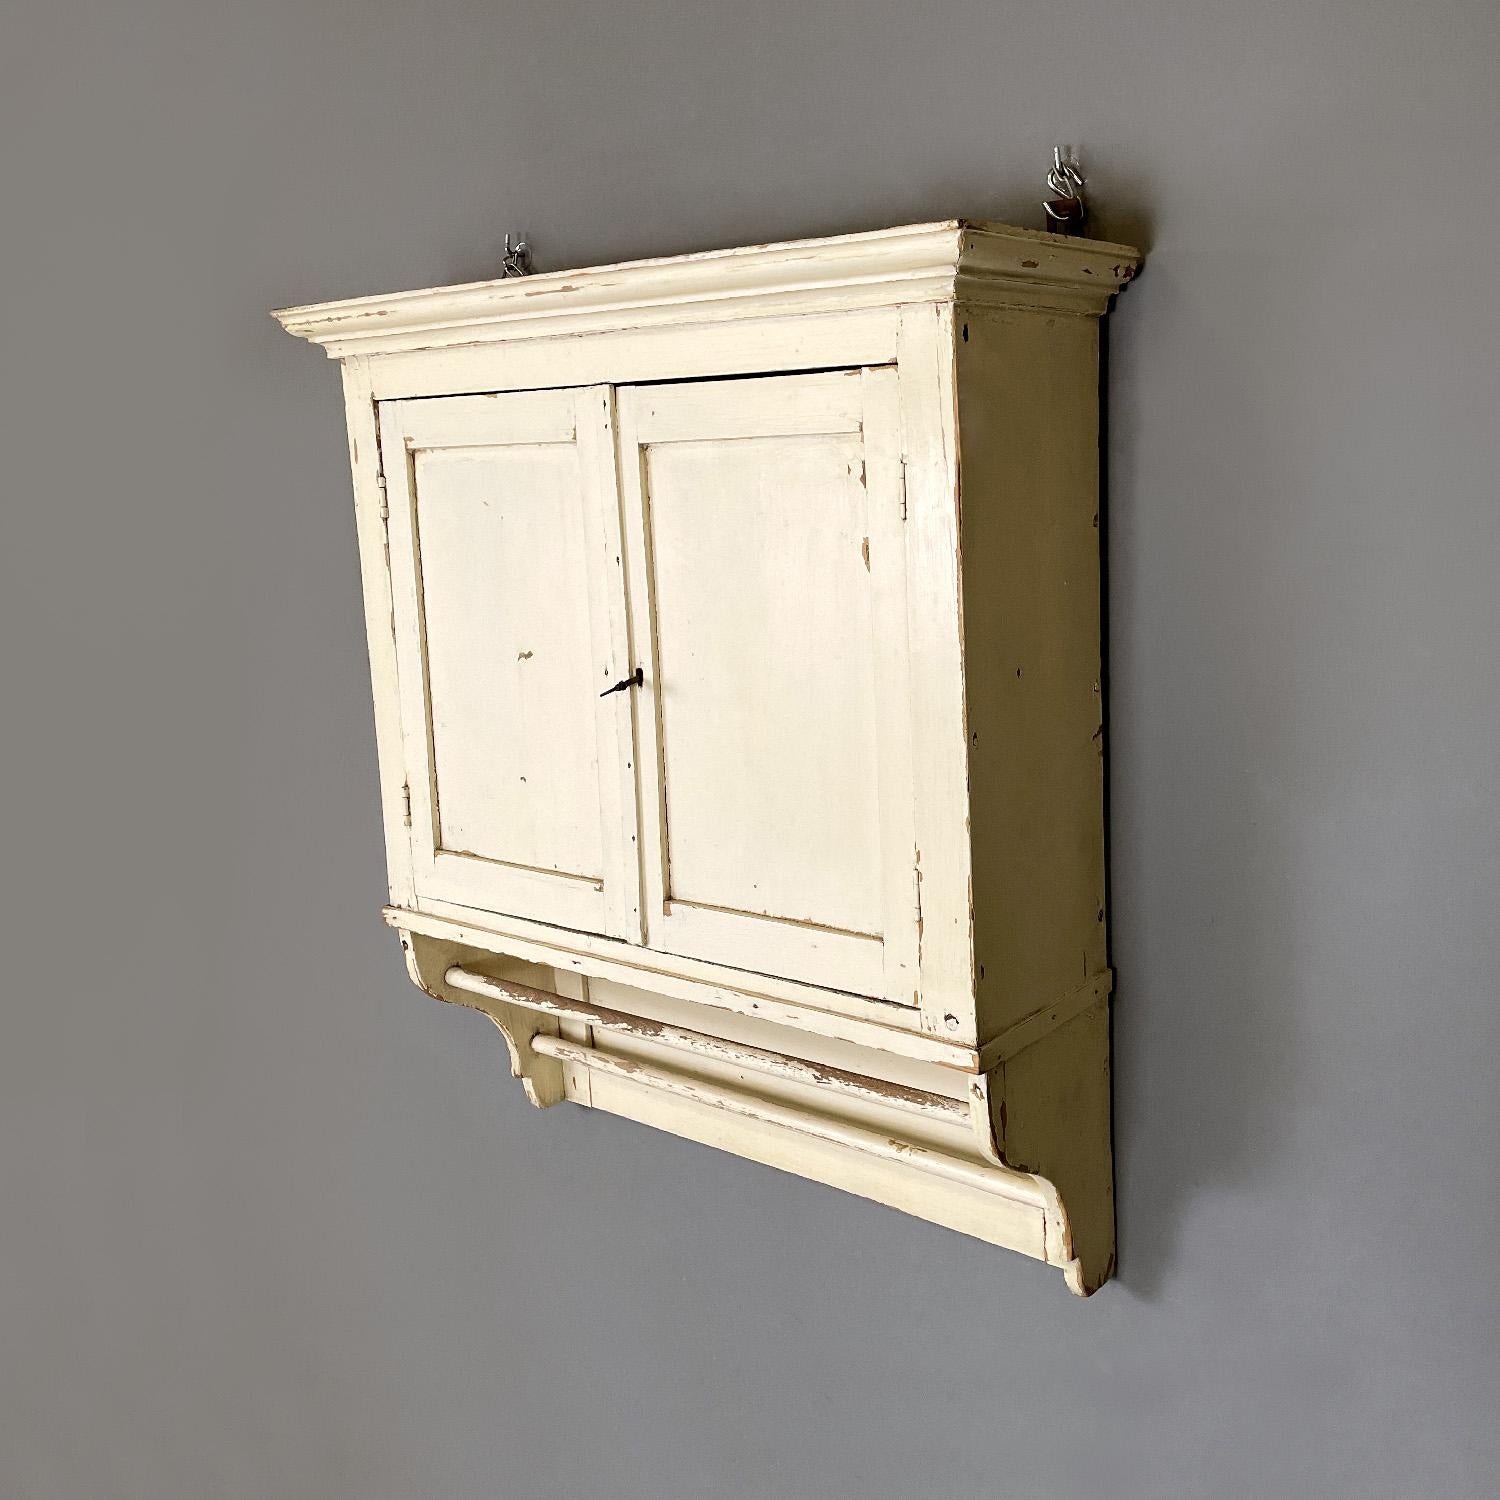 Italian antique white wooden kitchen wall cupboard, early 1900s
Wall cupboard or kitchen cabinet in white painted wood. It has two main doors with a key, inside them the space is divided into four parts by a shelf and a central divider, the left